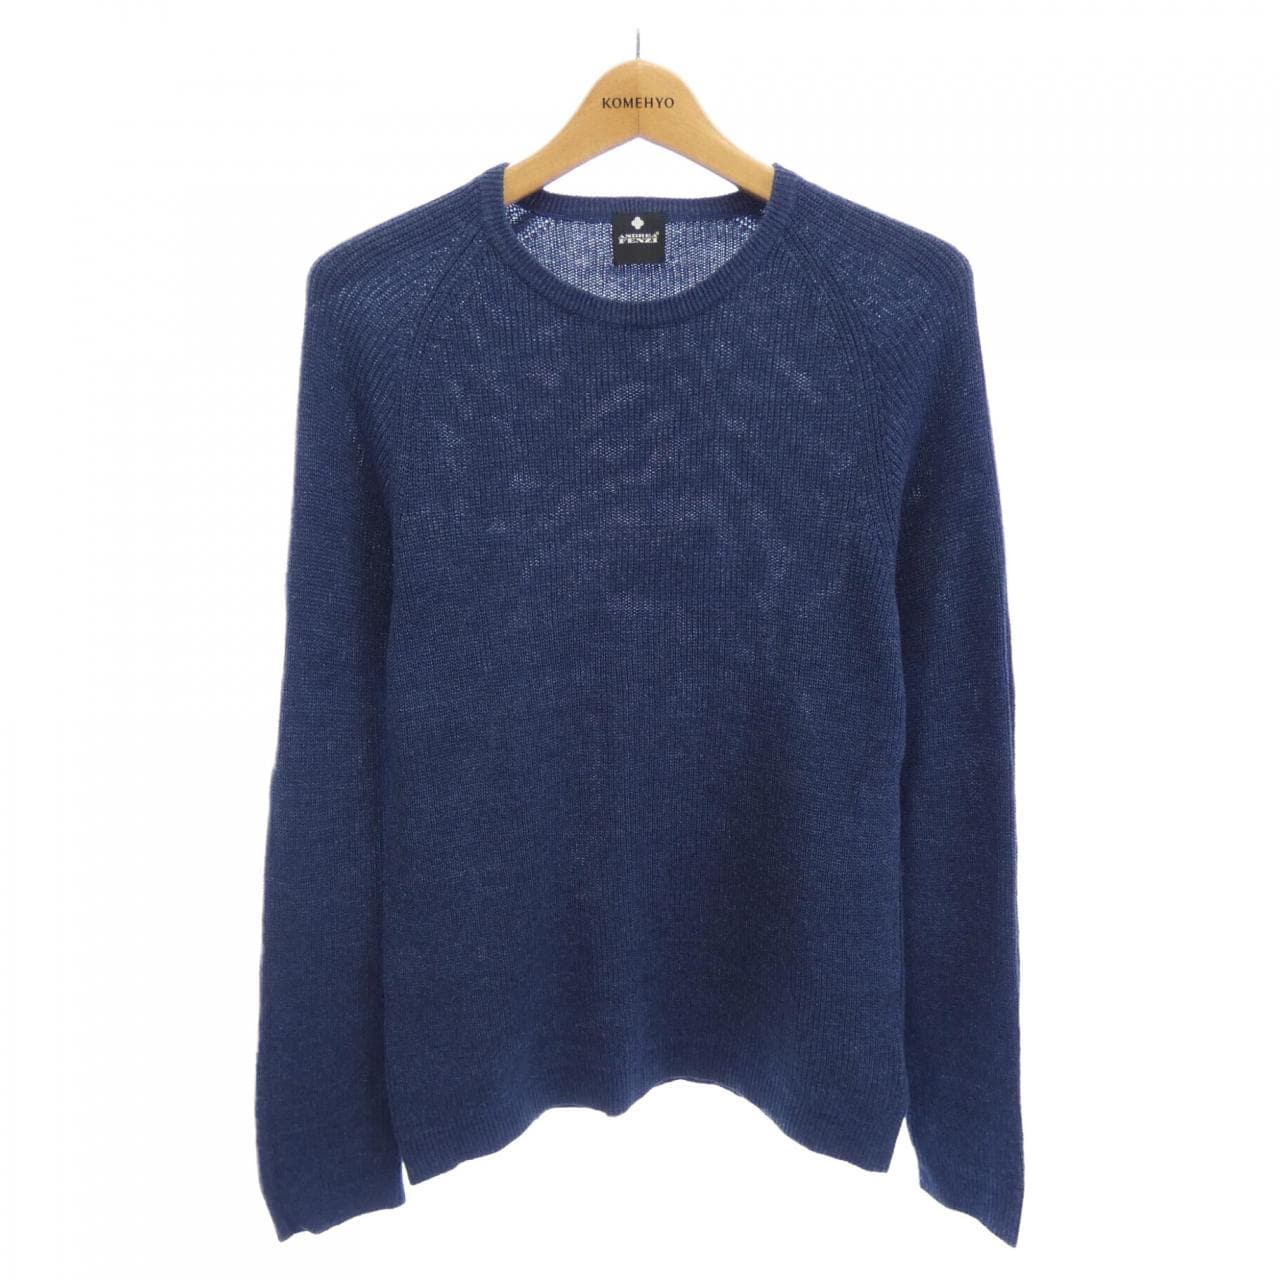 ANDREAFENZI knit